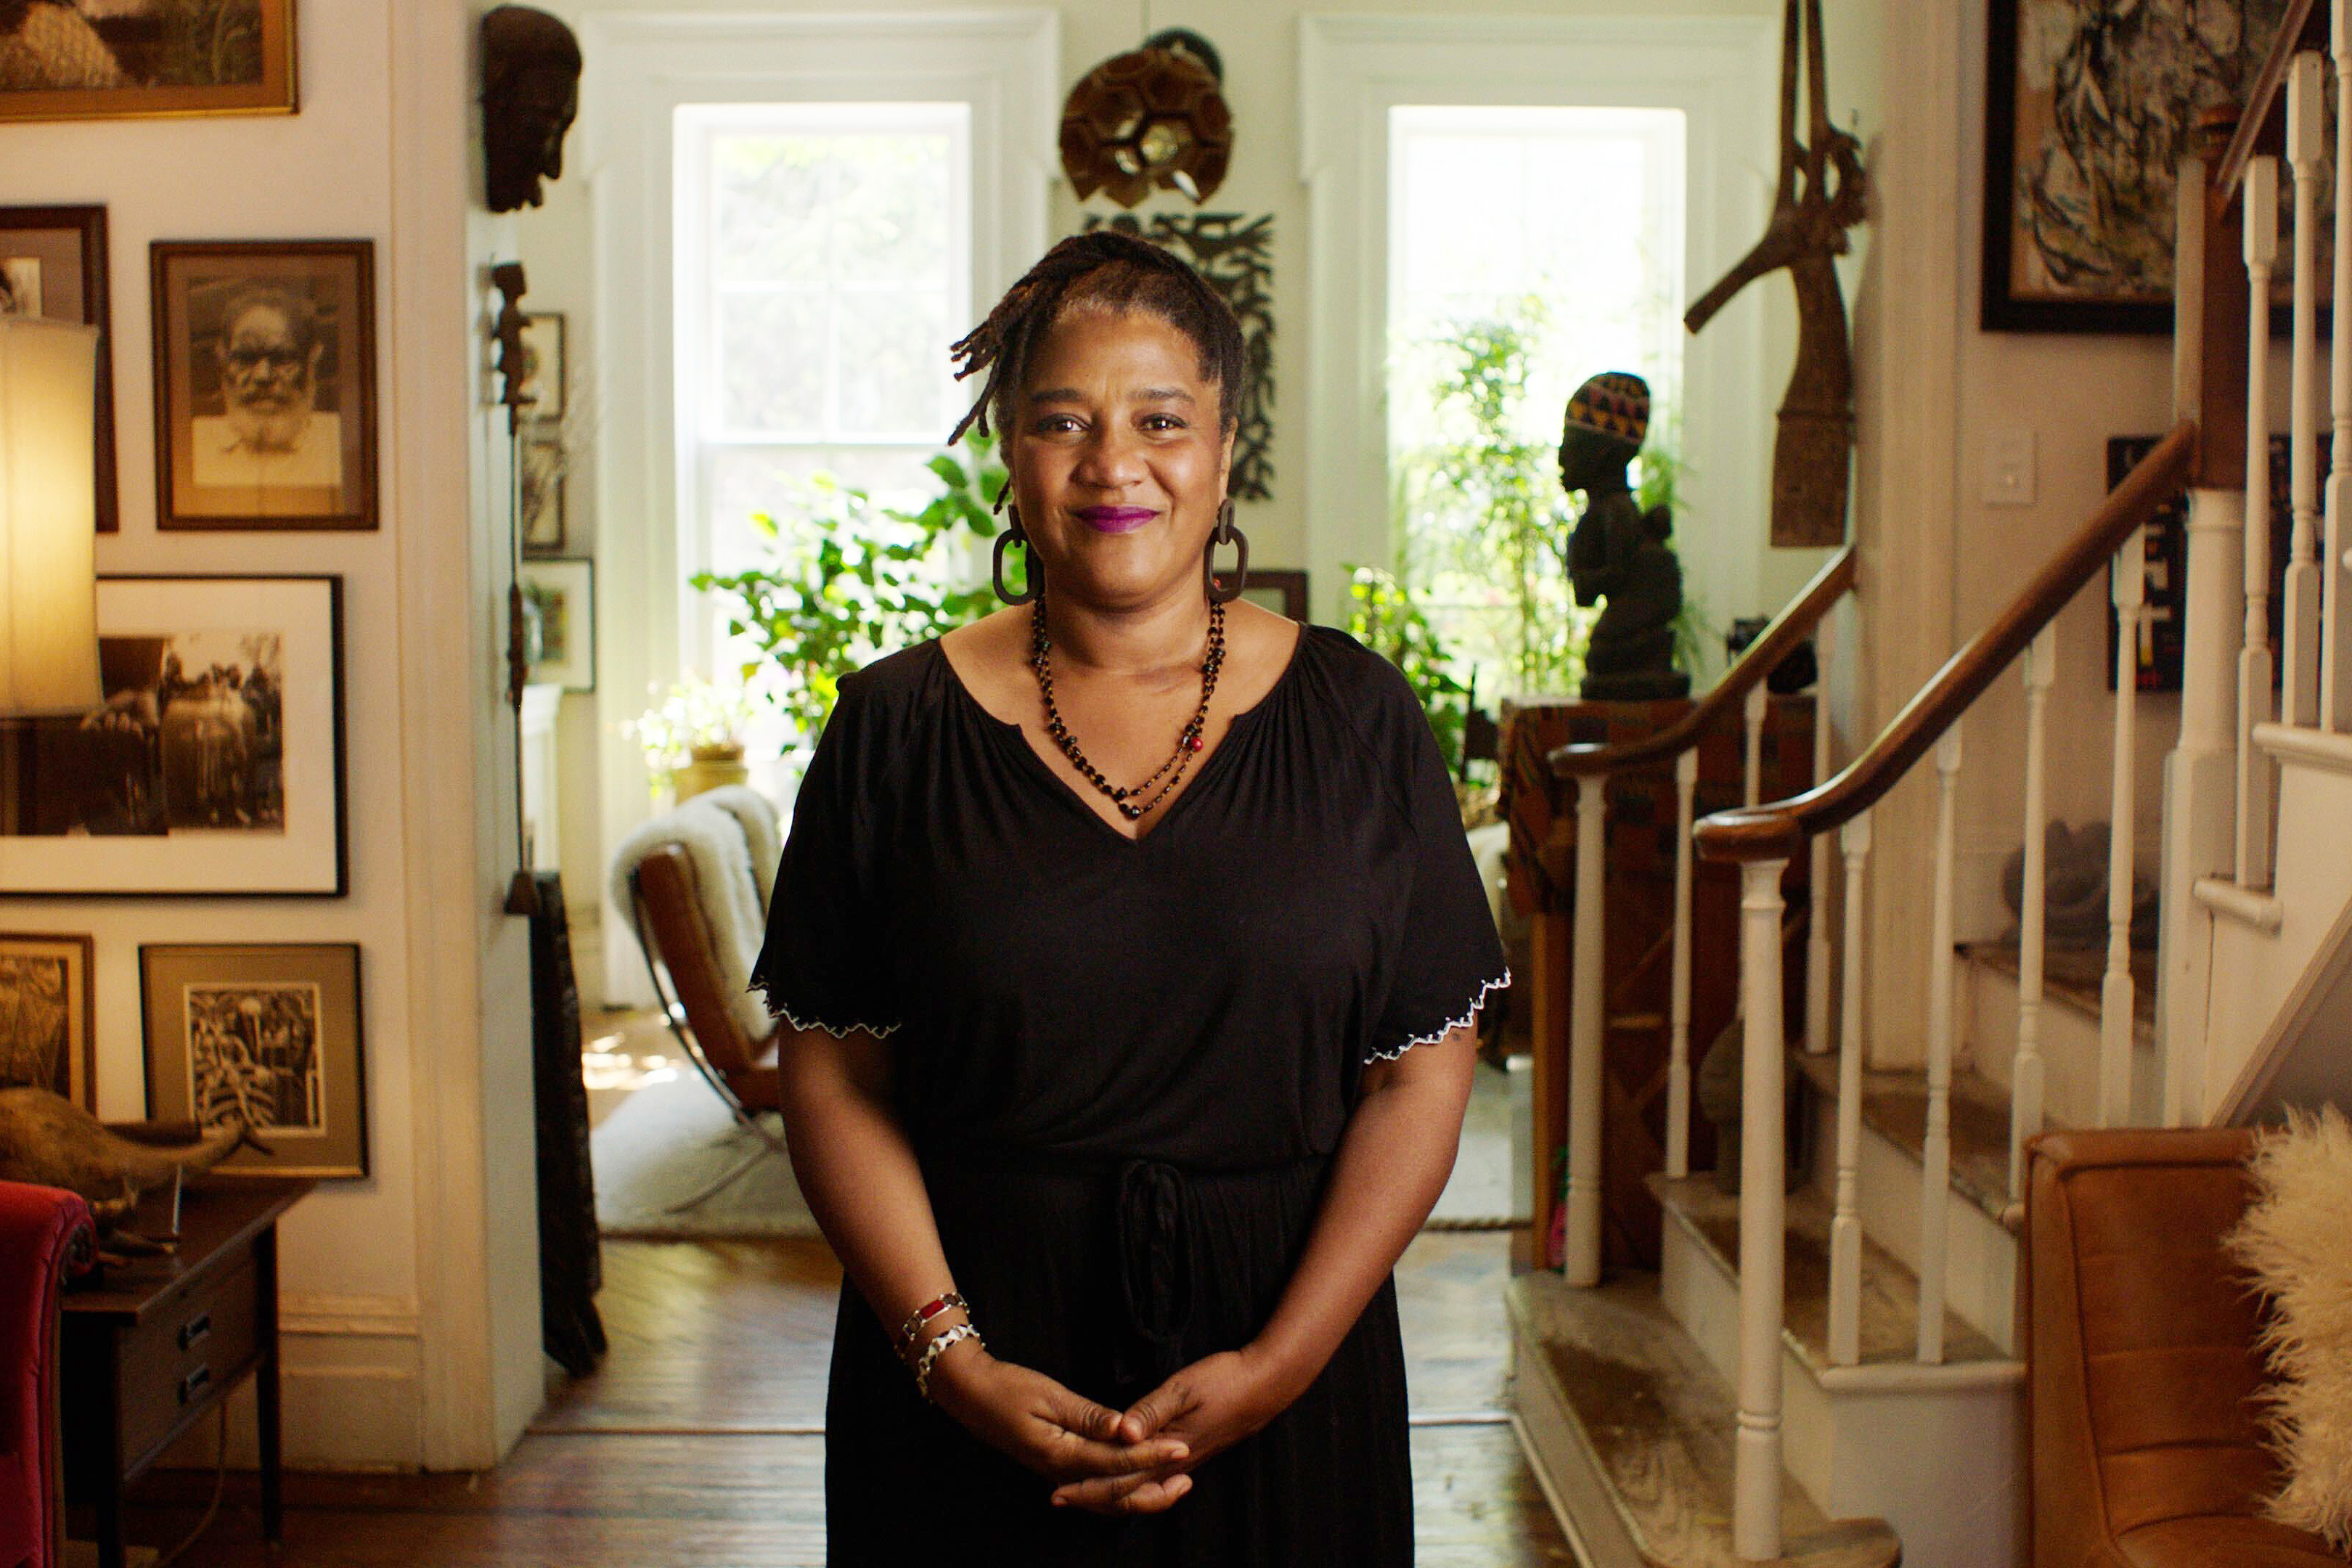 honorary degree recipient Lynn Nottage at her home in Brooklyn